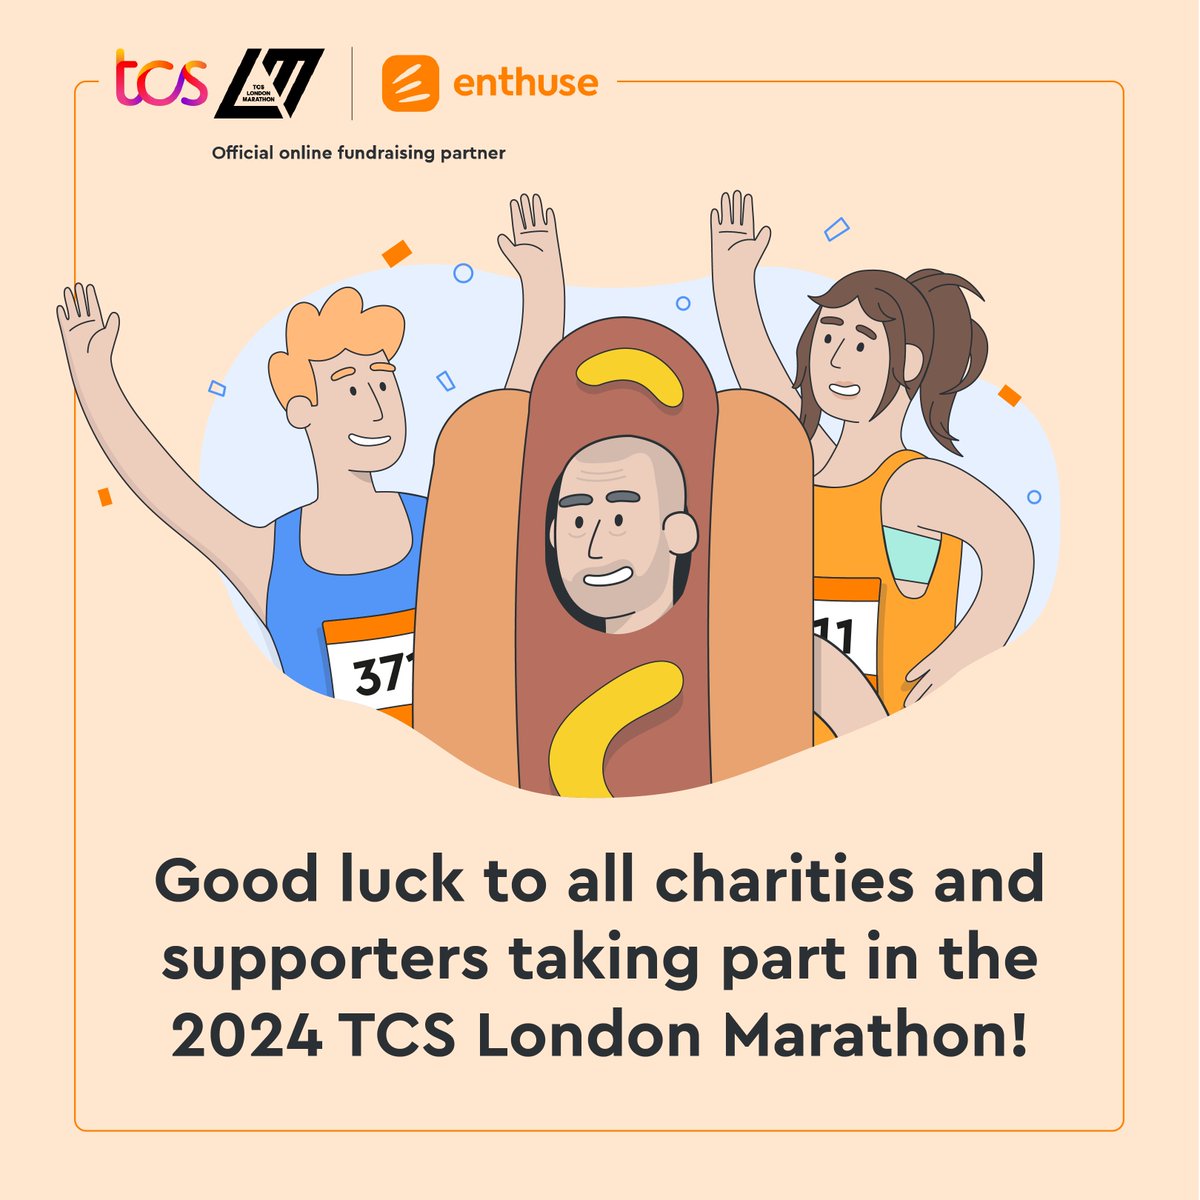 Today's the big day!🧡 Good luck to all the charities and their fundraisers taking part in the TCS #LondonMarathon. Enjoy yourself, thank you for making it so special!